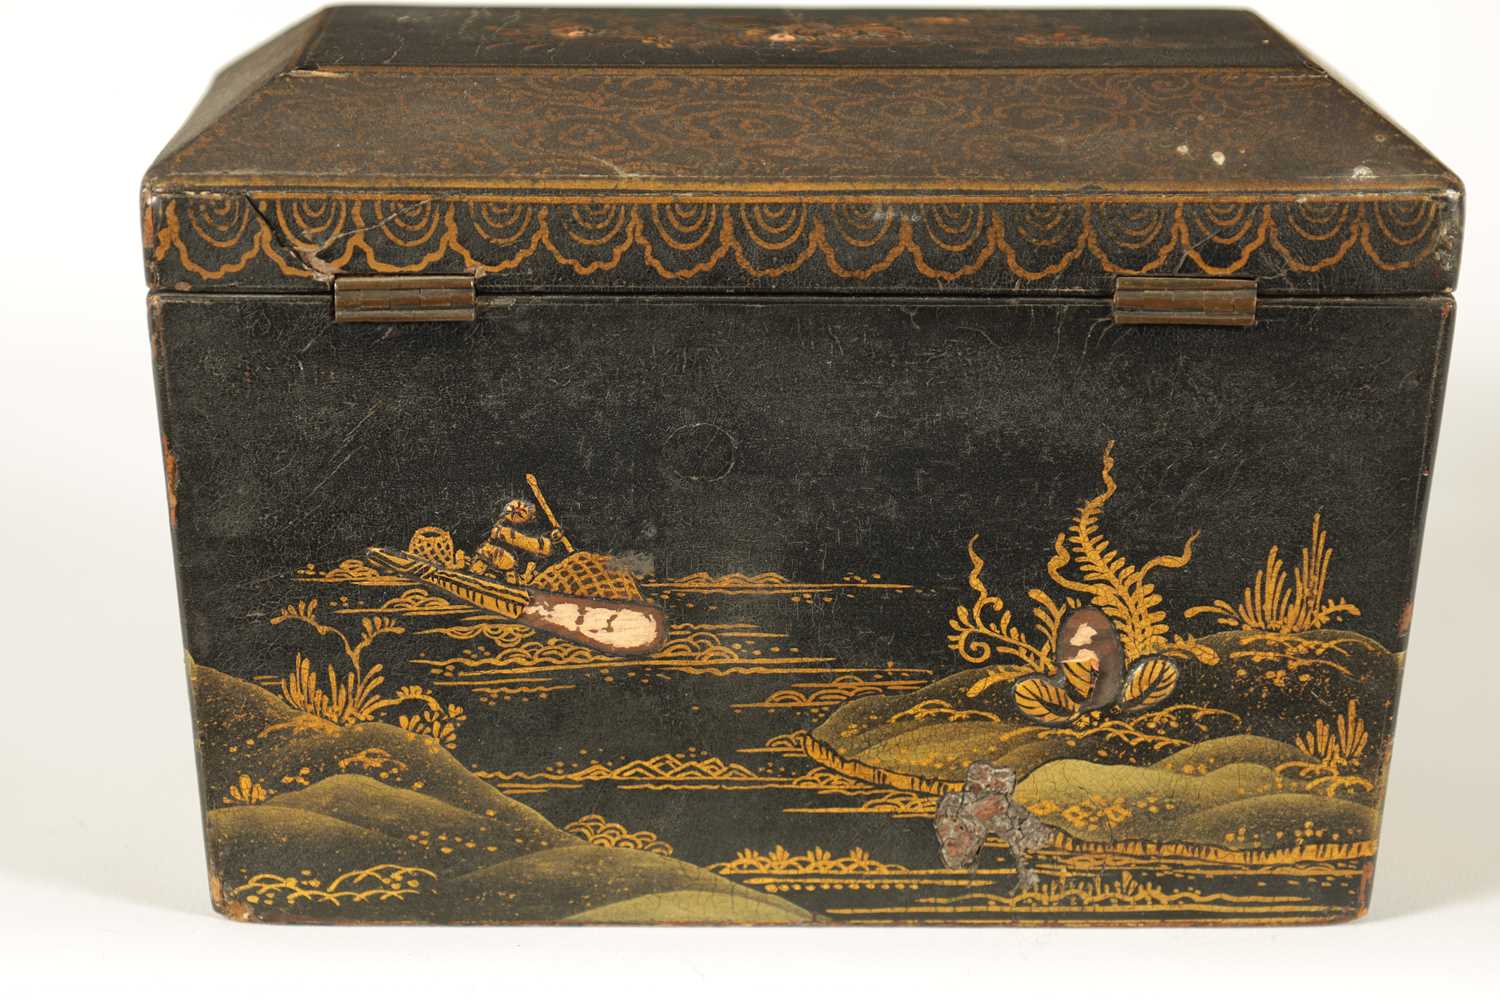 A LATE GEORGIAN BLACK LACQUER AND CHINOISERRIE SARCOPHAGUS TEA CADDY - Image 11 of 16